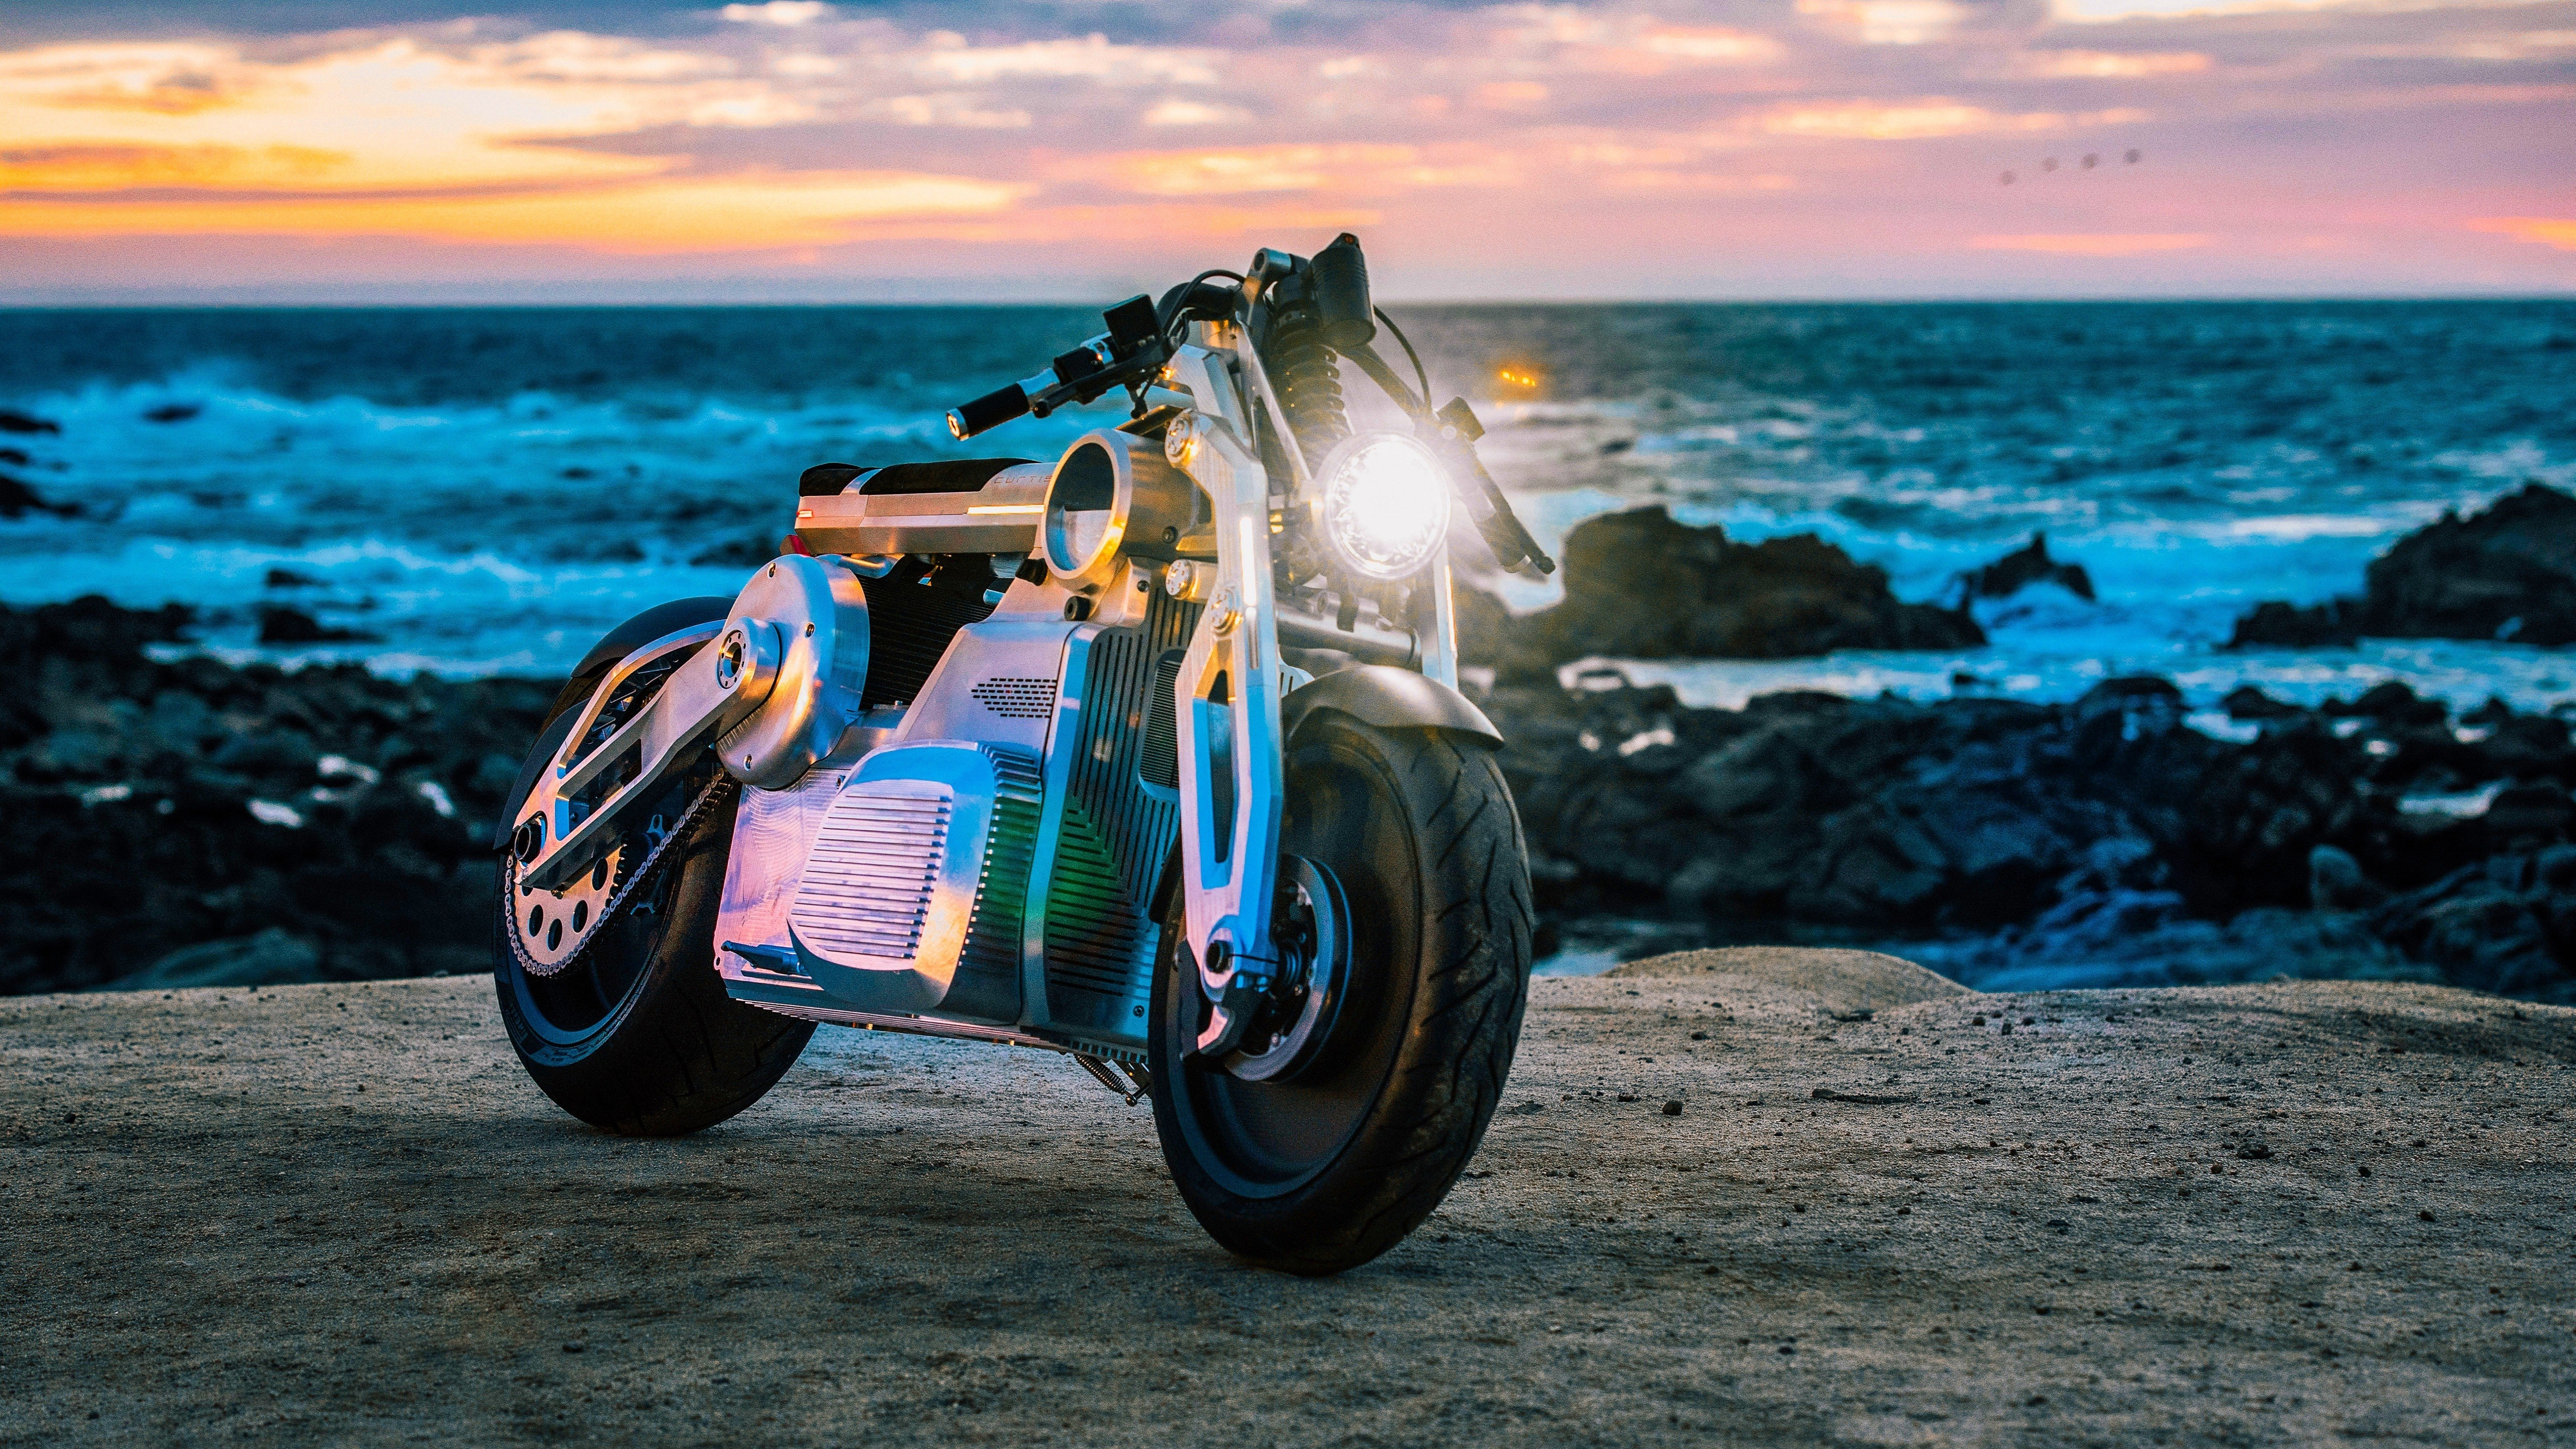 5k Wallpaper Of Curtiss Zeus Concept Bike - Motorcycle By The Sea Hd - HD Wallpaper 